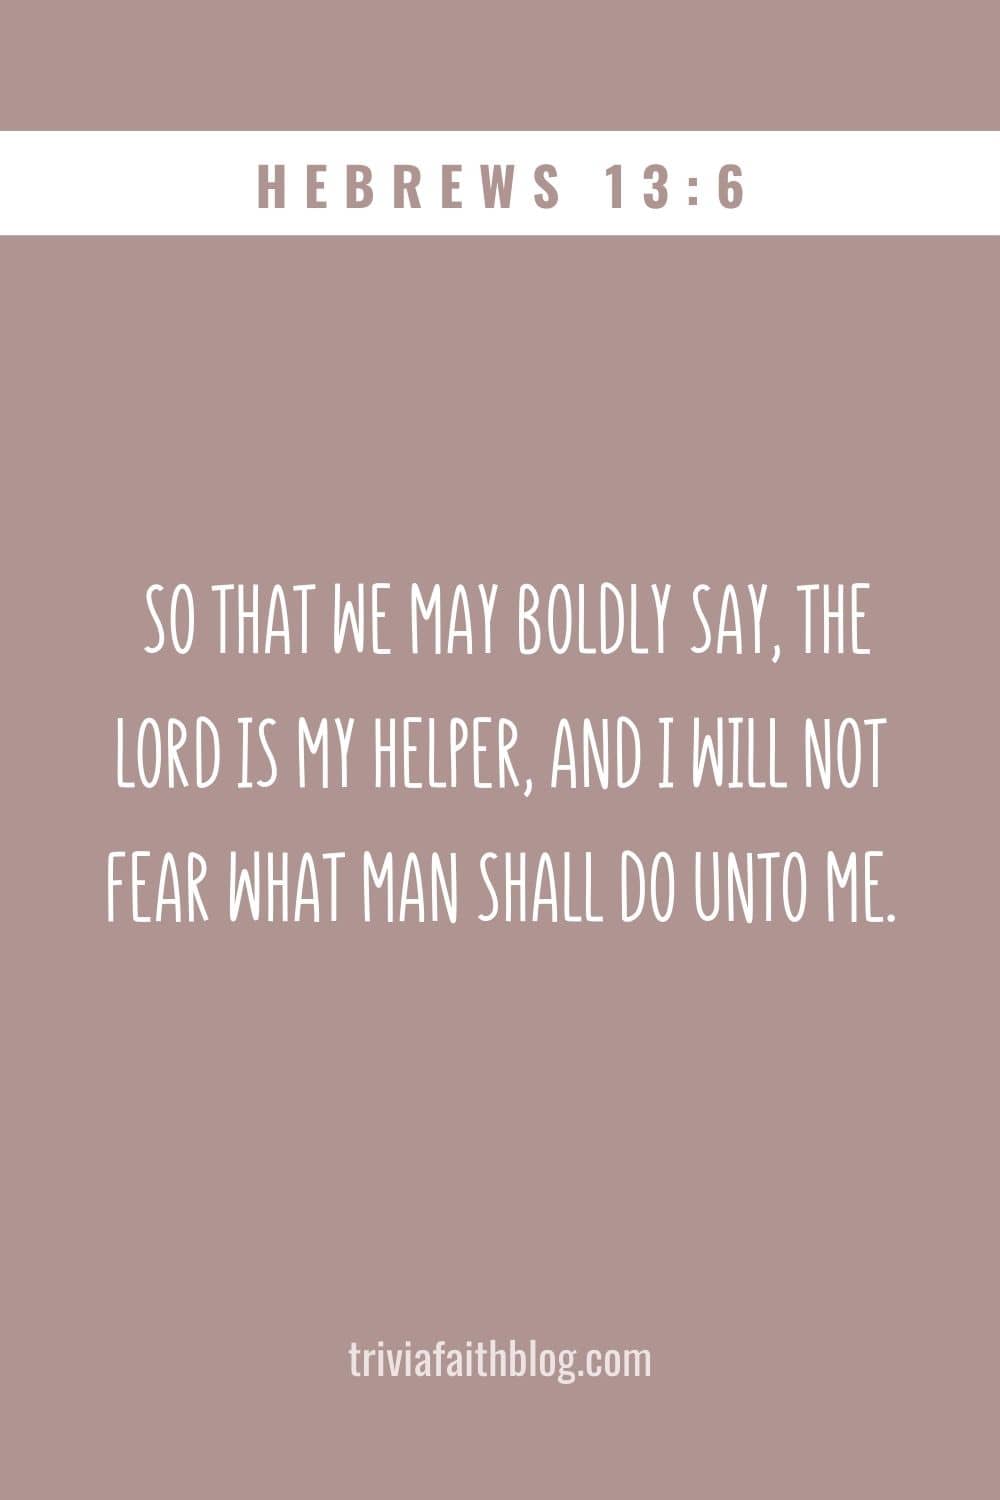 So that we may boldly say, The Lord is my helper, and I will not fear what man shall do unto me